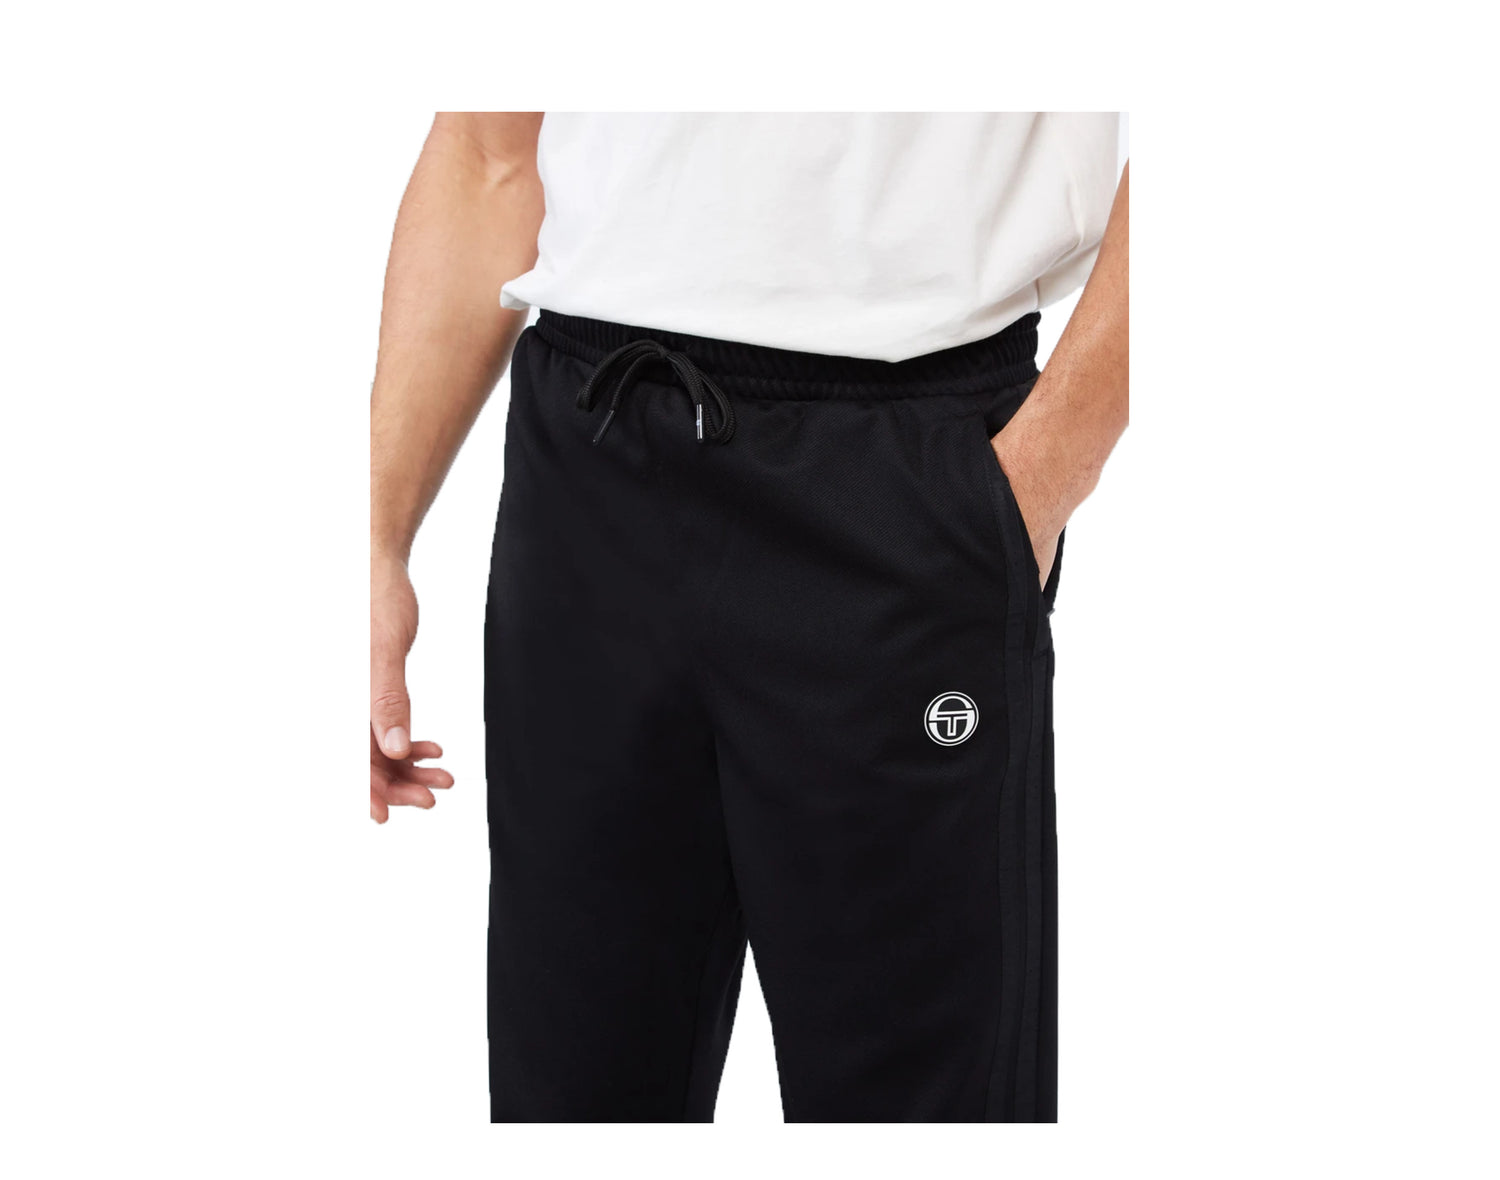 Sergio Tacchini Young Line Men's Track Pants